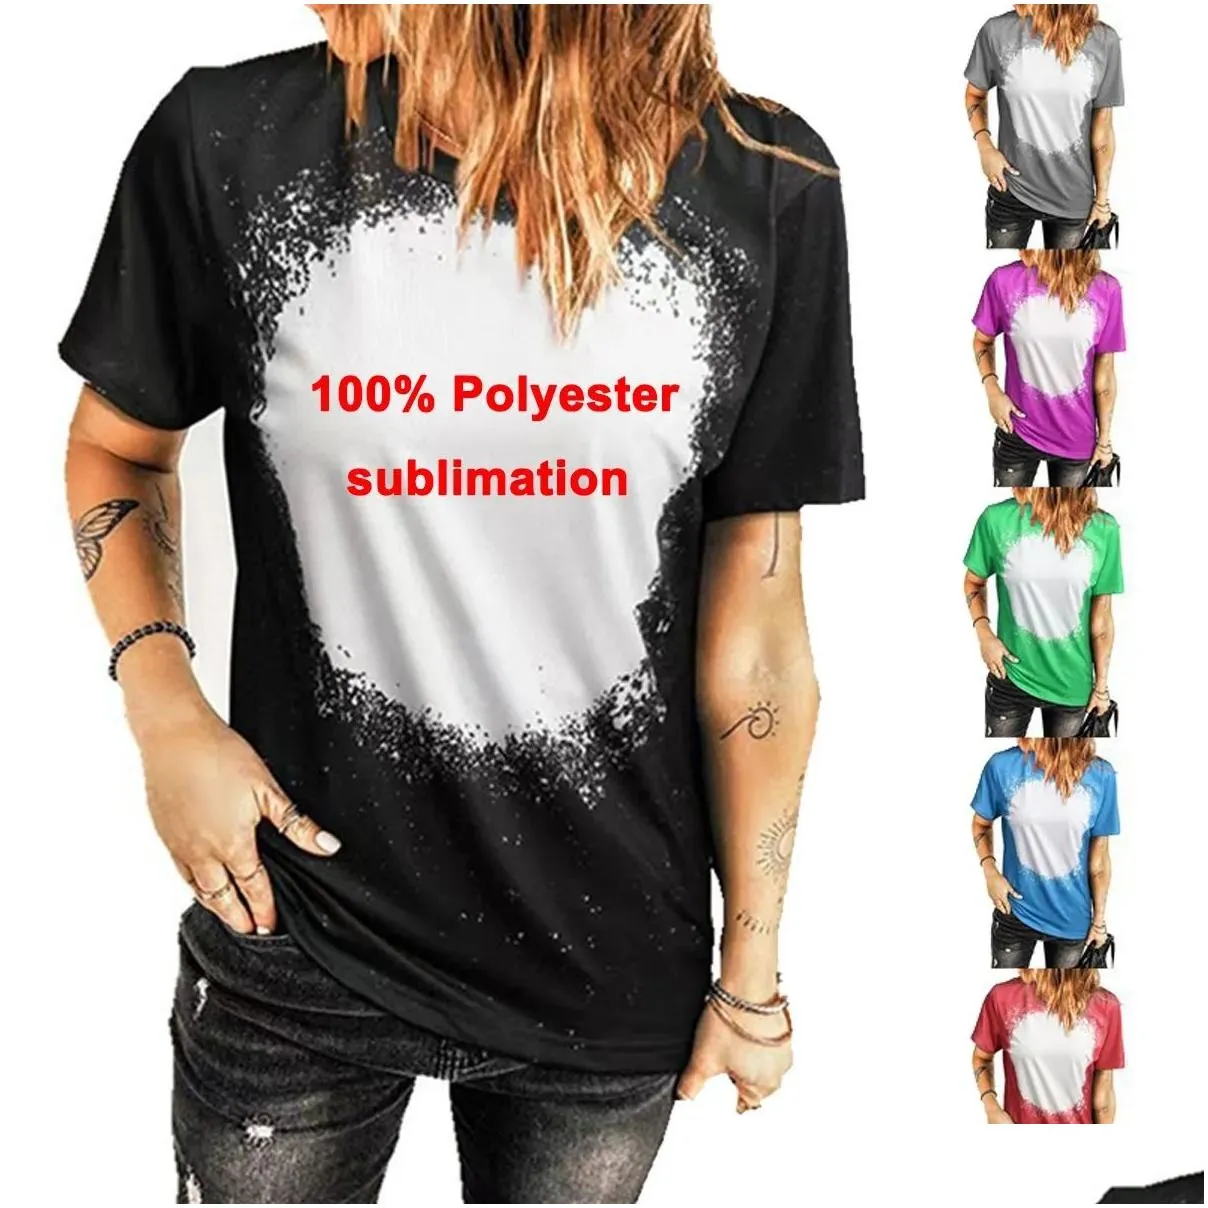 wholesale sublimation bleached shirts heat transfer blank bleach shirt bleached polyester t-shirts us men women party supplies stock